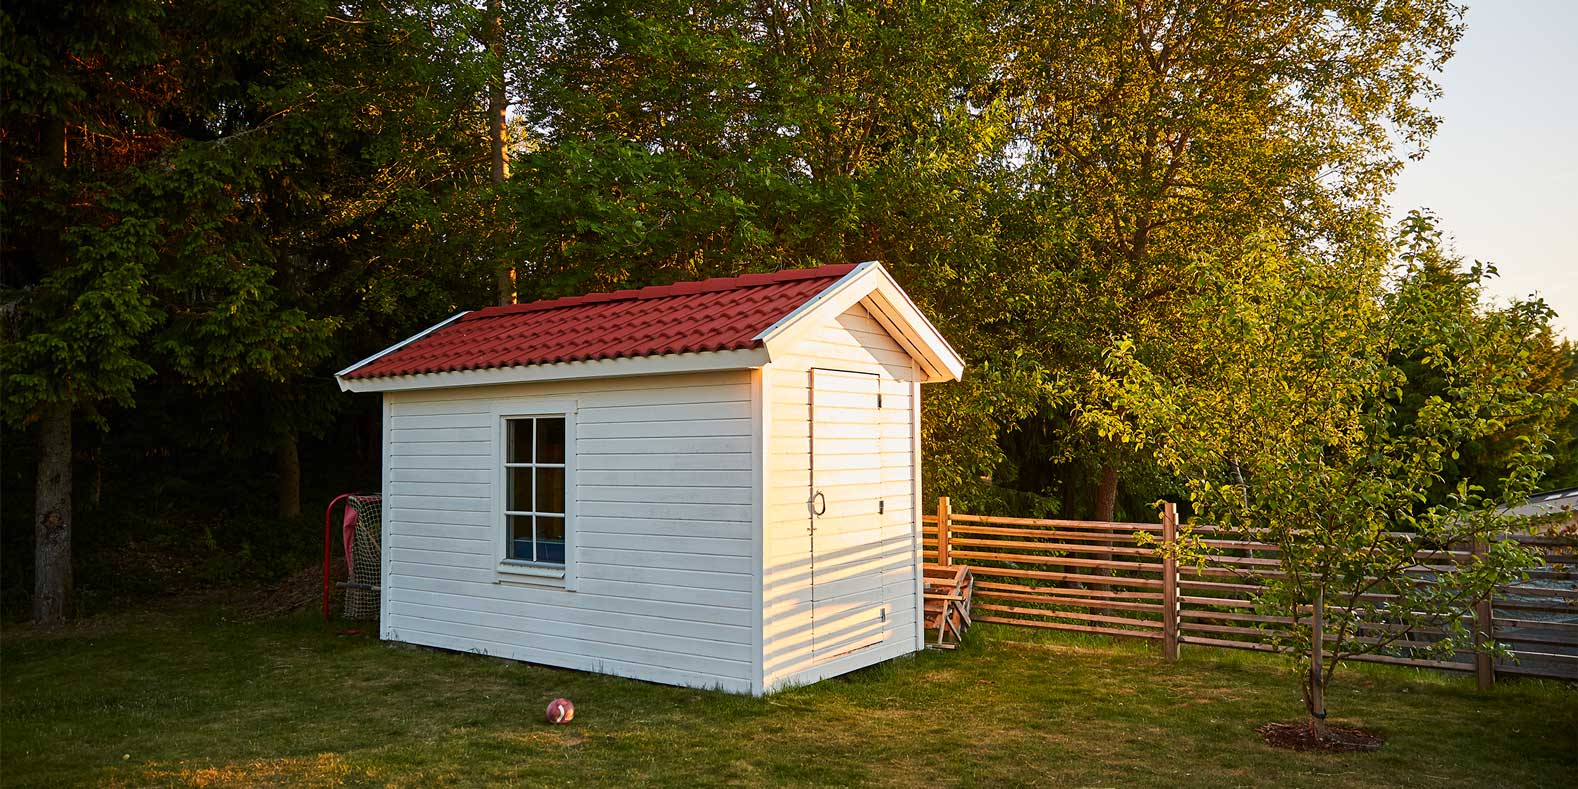 Secure Your Shed: Five Tips to Prevent Theft